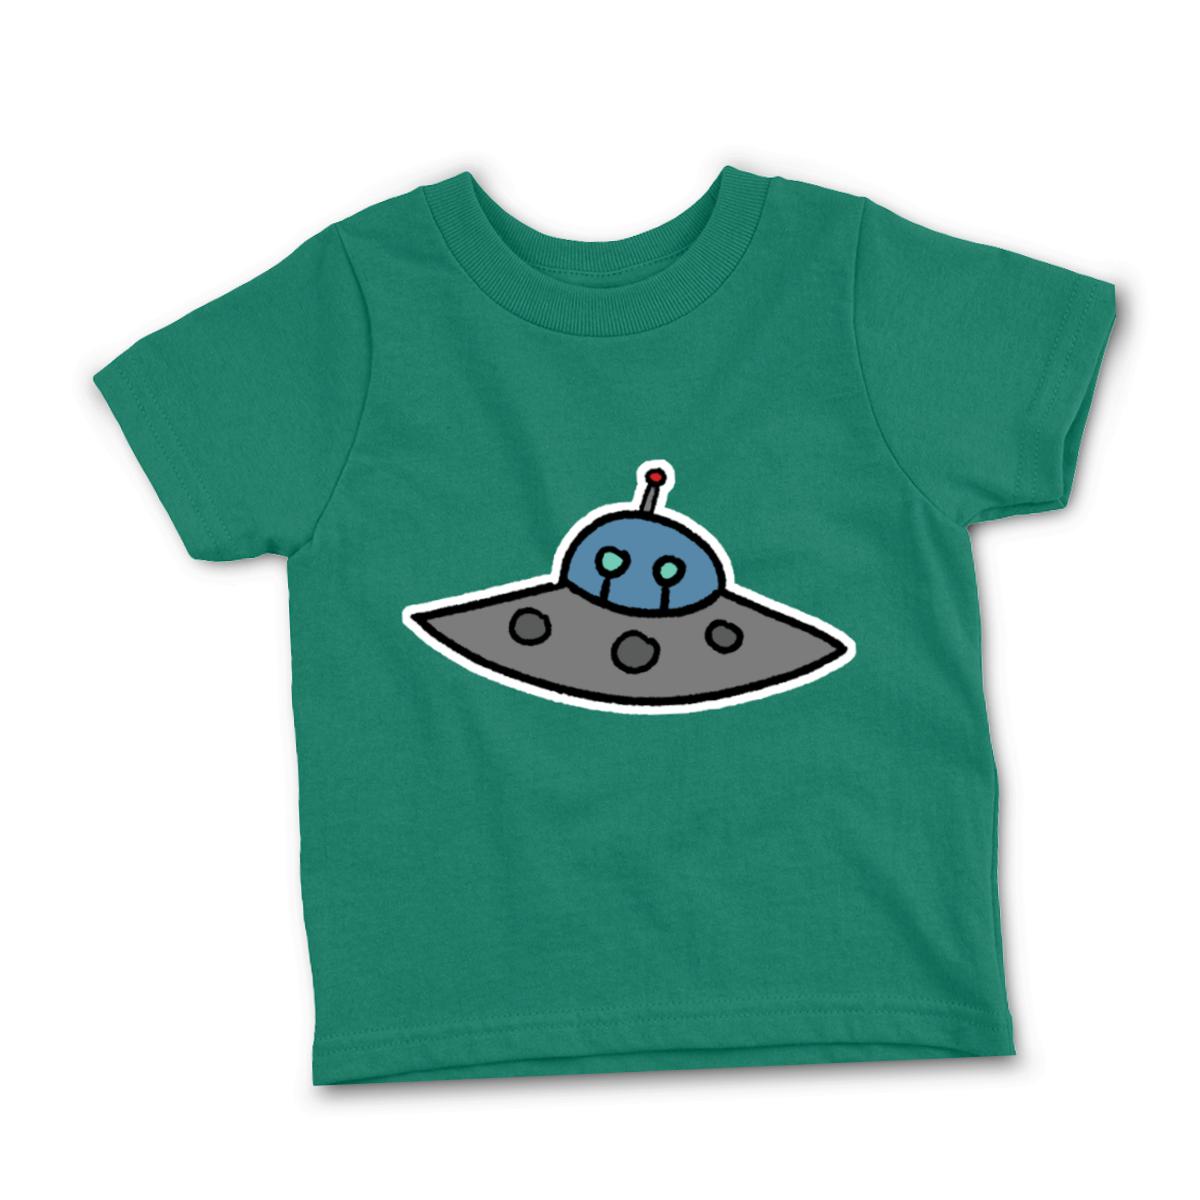 Flying Saucer Toddler Tee 56T kelly